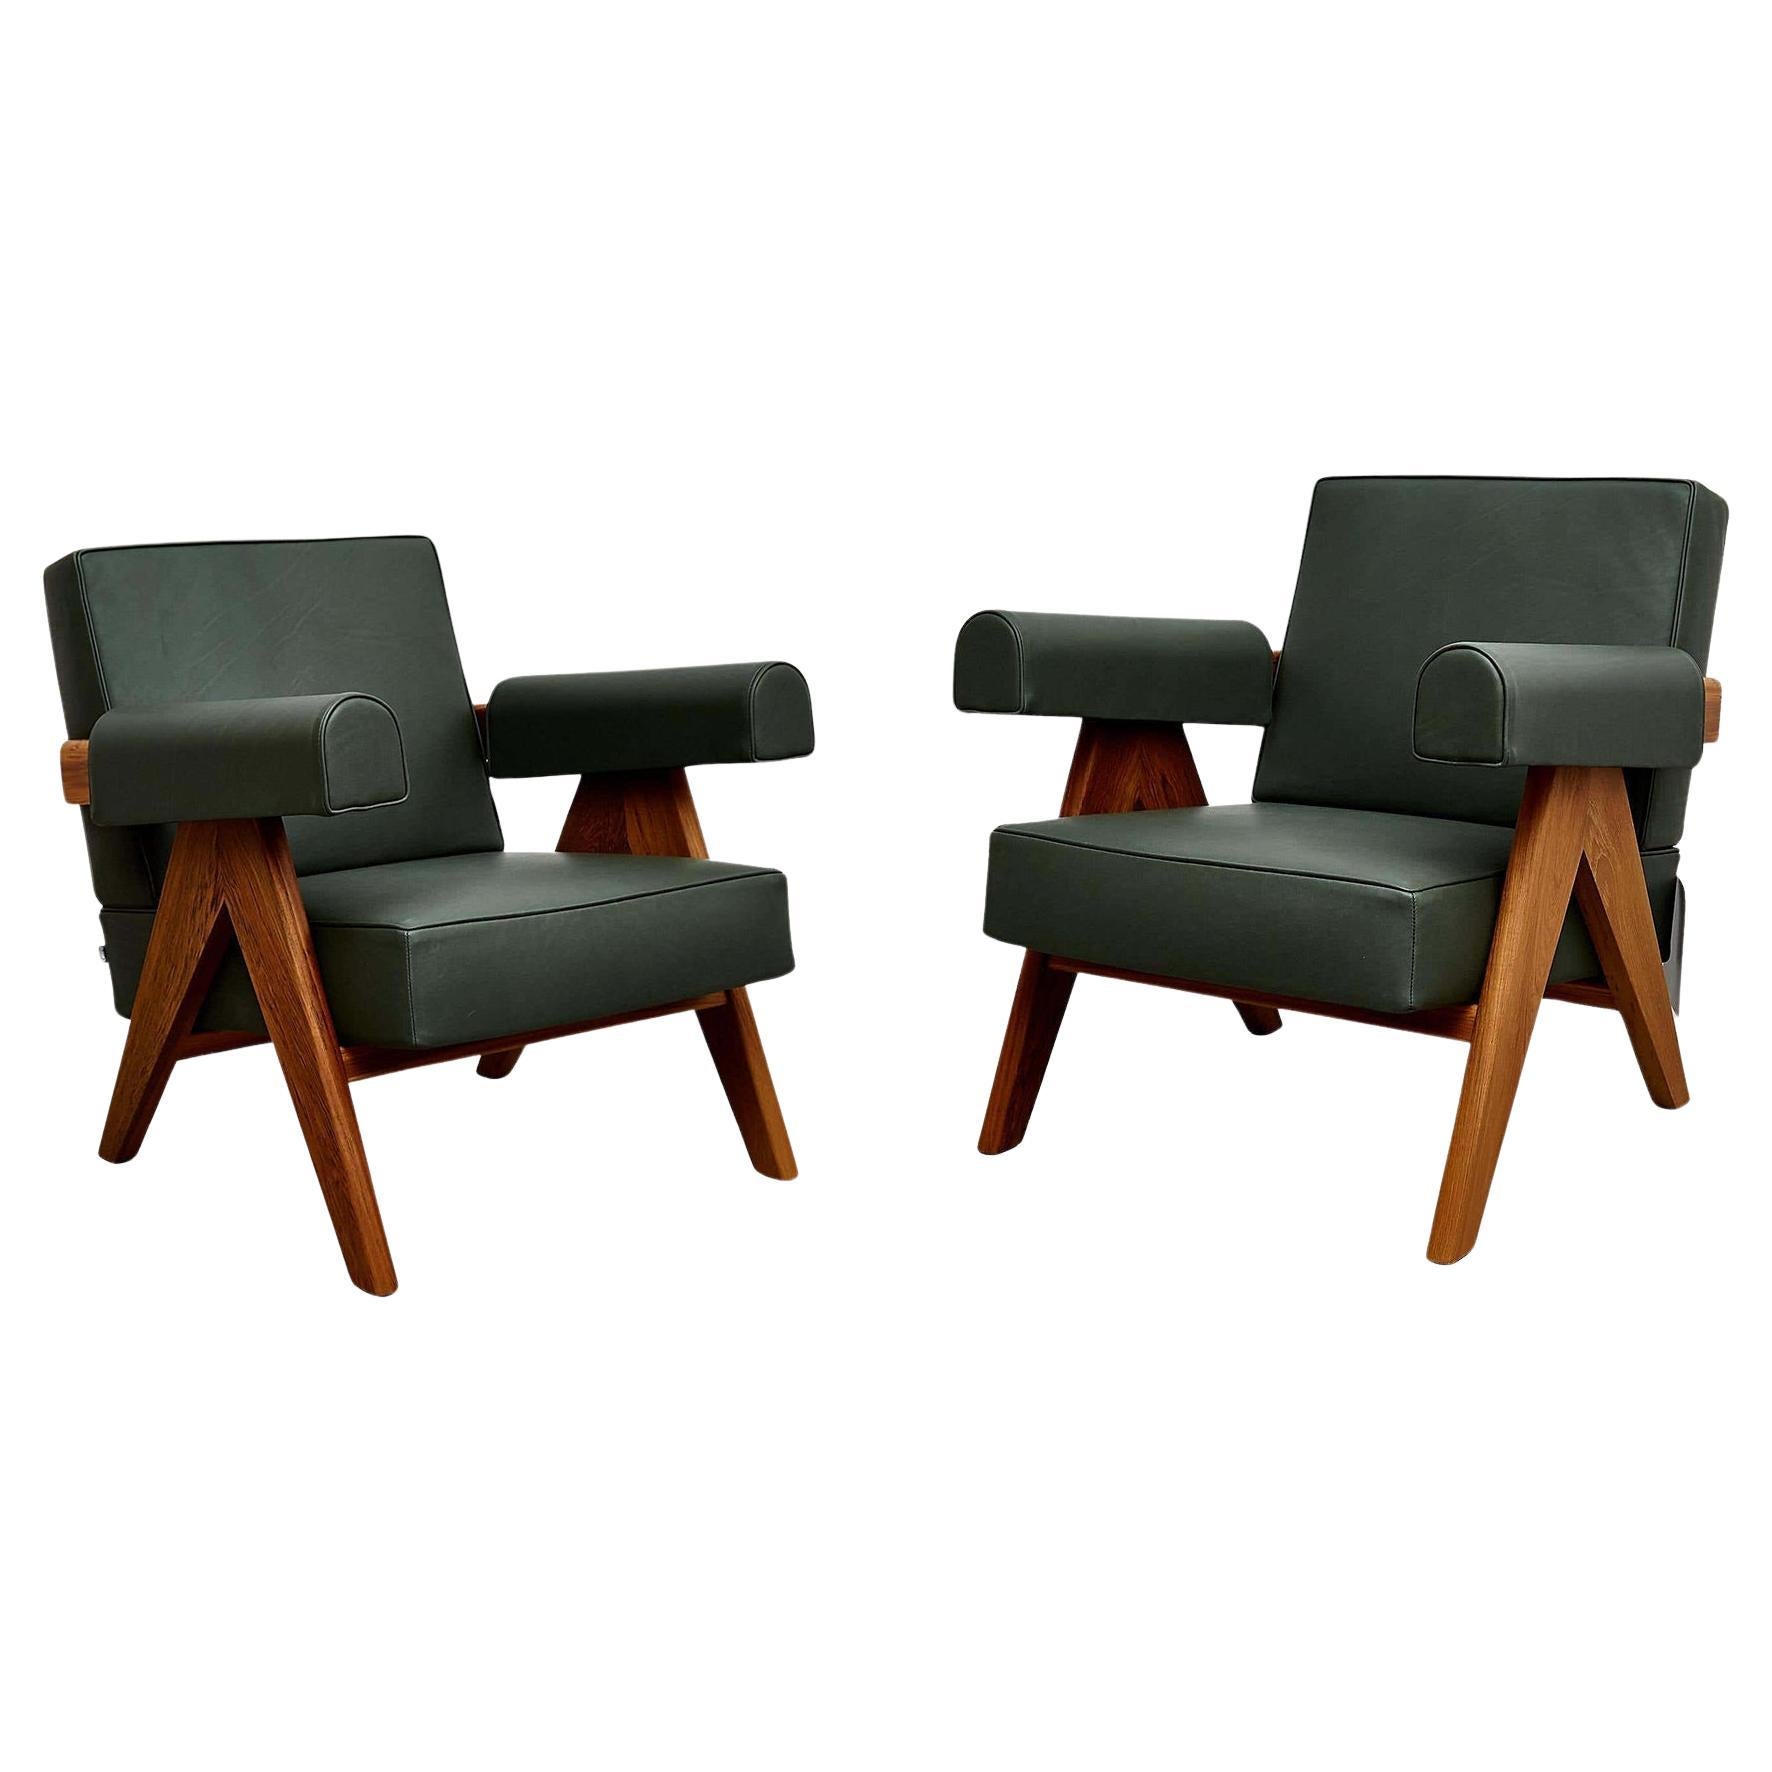 Indulge in refined comfort and timeless elegance with this set of two Pierre Jeanneret Armchairs, originally designed circa 1950 and thoughtfully relaunched in 2019 by Cassina in Italy. Immerse yourself in the iconic design that seamlessly blends